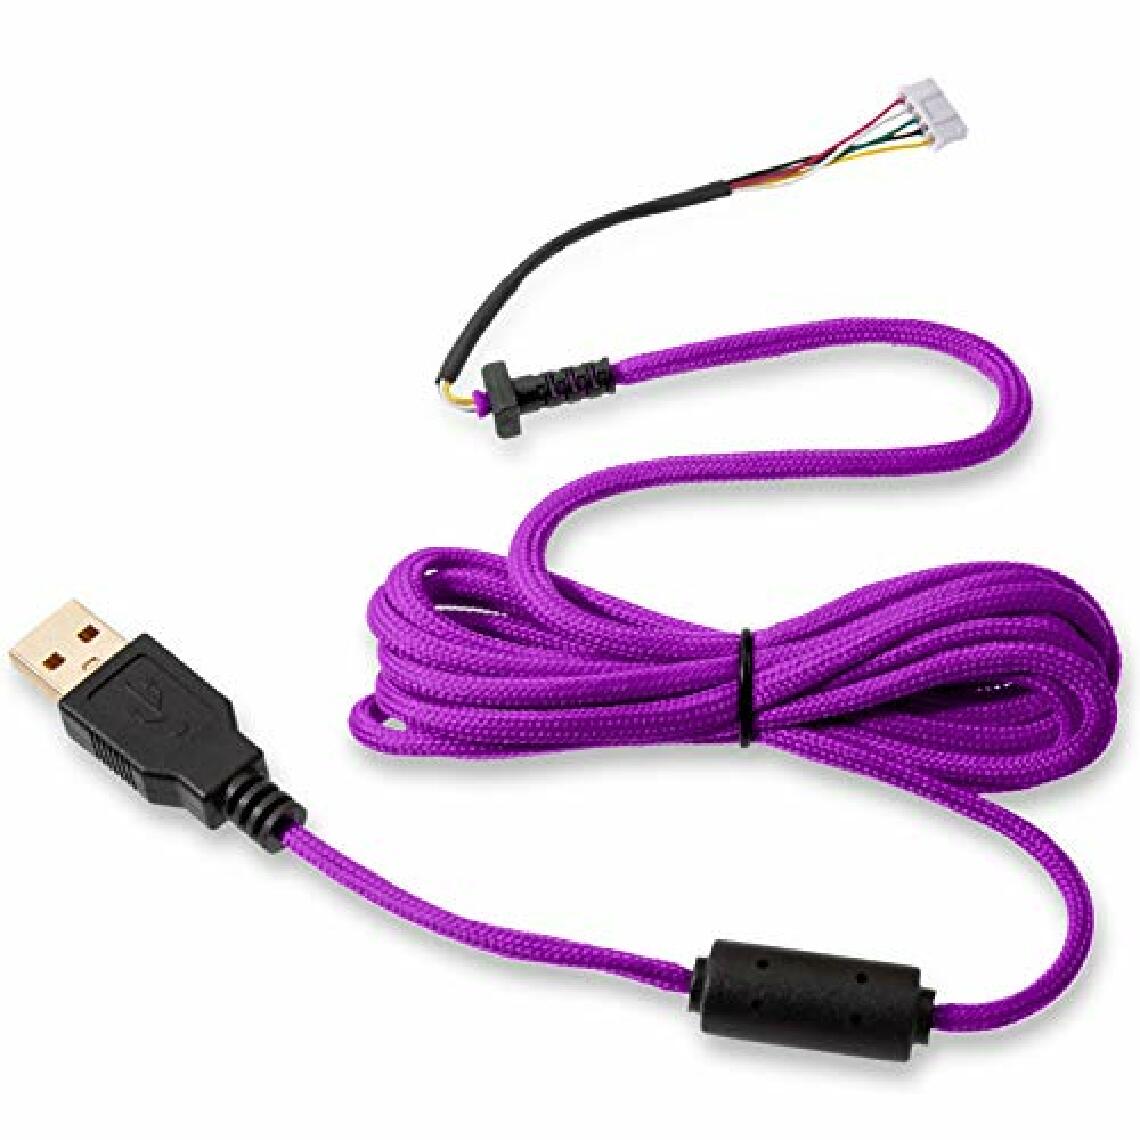 Glorious Pc Gaming Race - Ascended Cable V2 - Purple Reign - Souris